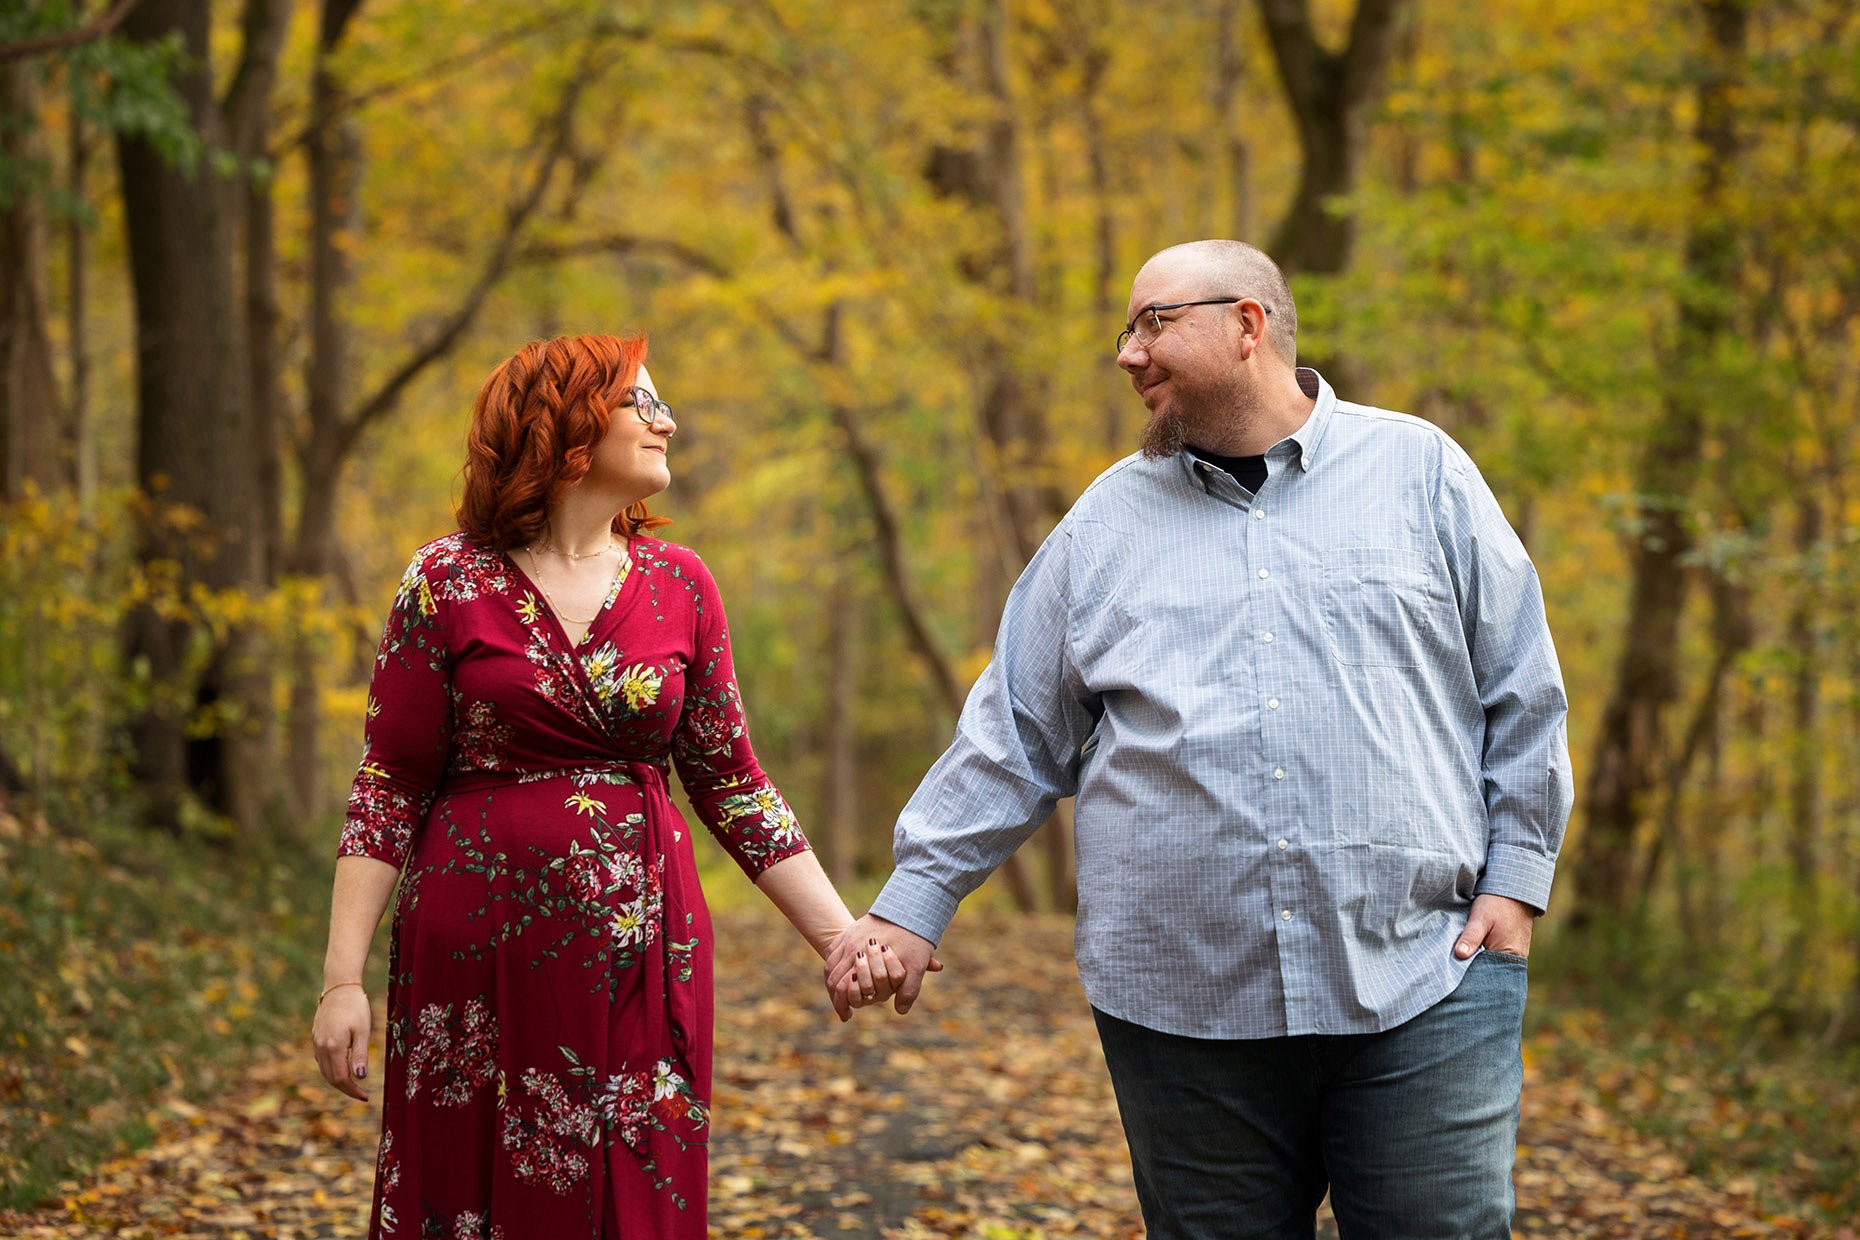 Walking at an engagement session